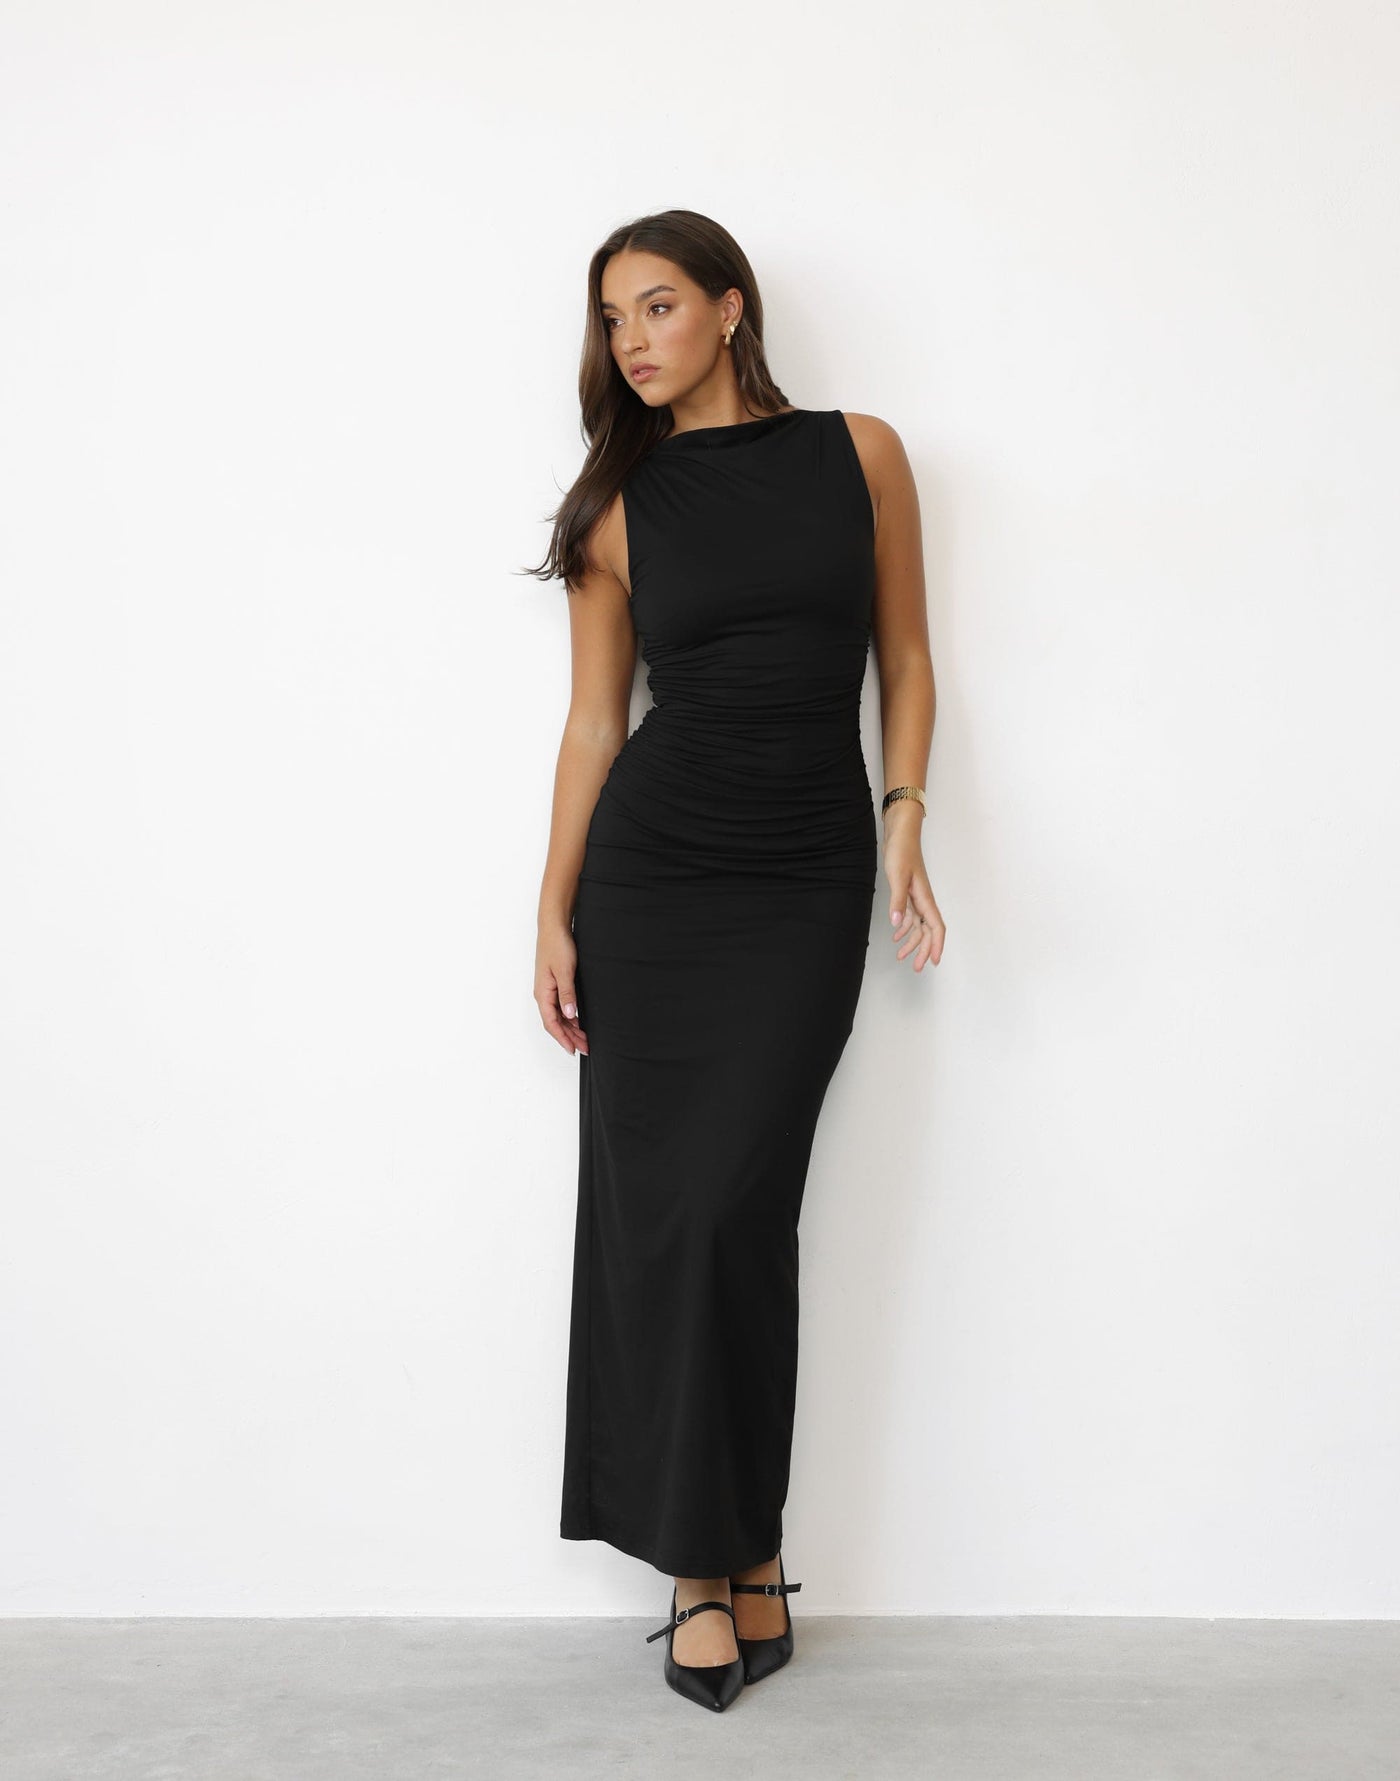 Caprice Maxi Dress (Black) | CHARCOAL Exclusive - Bodycon High Straight Neck Ruched Side Maxi Dress - Women's Dress - Charcoal Clothing